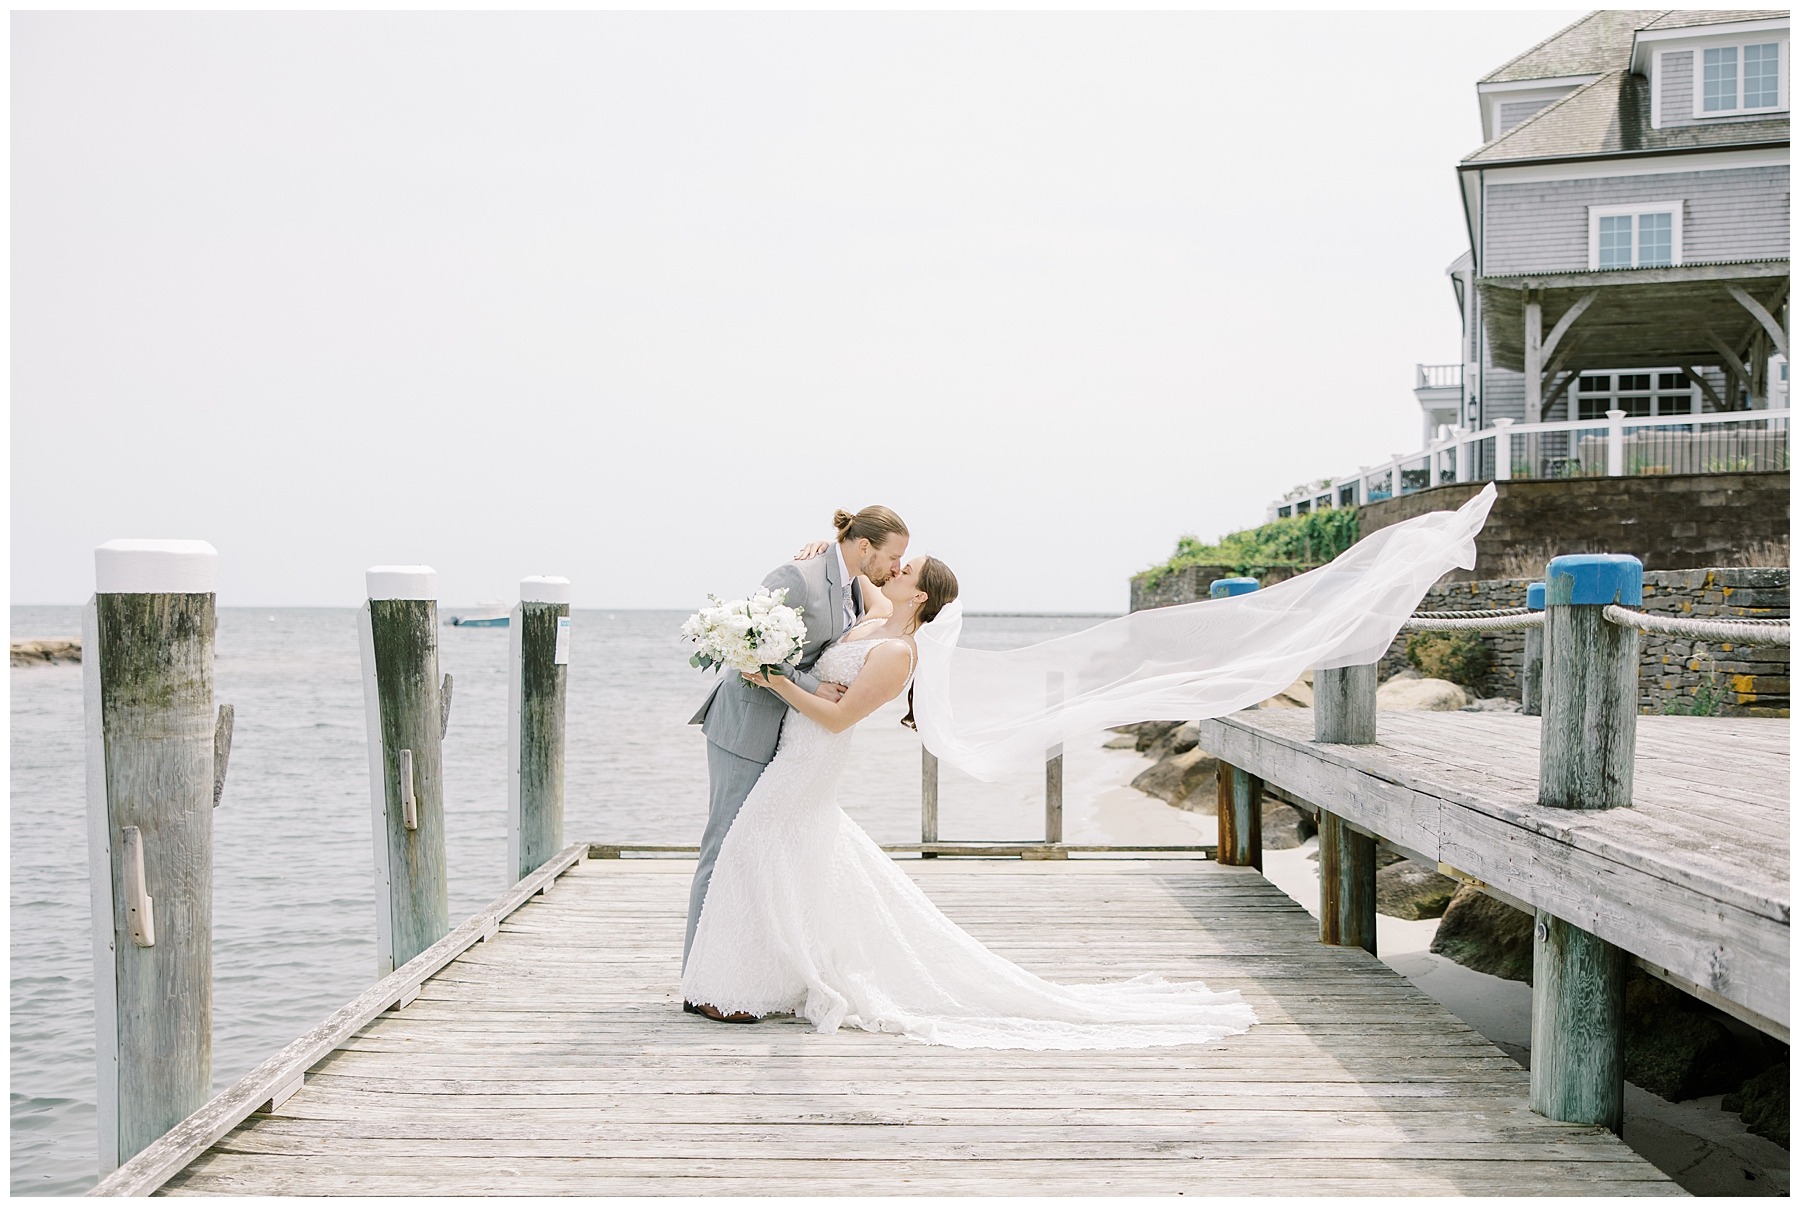 epic wedding portaits by the ocean at Wychmere Beach Club